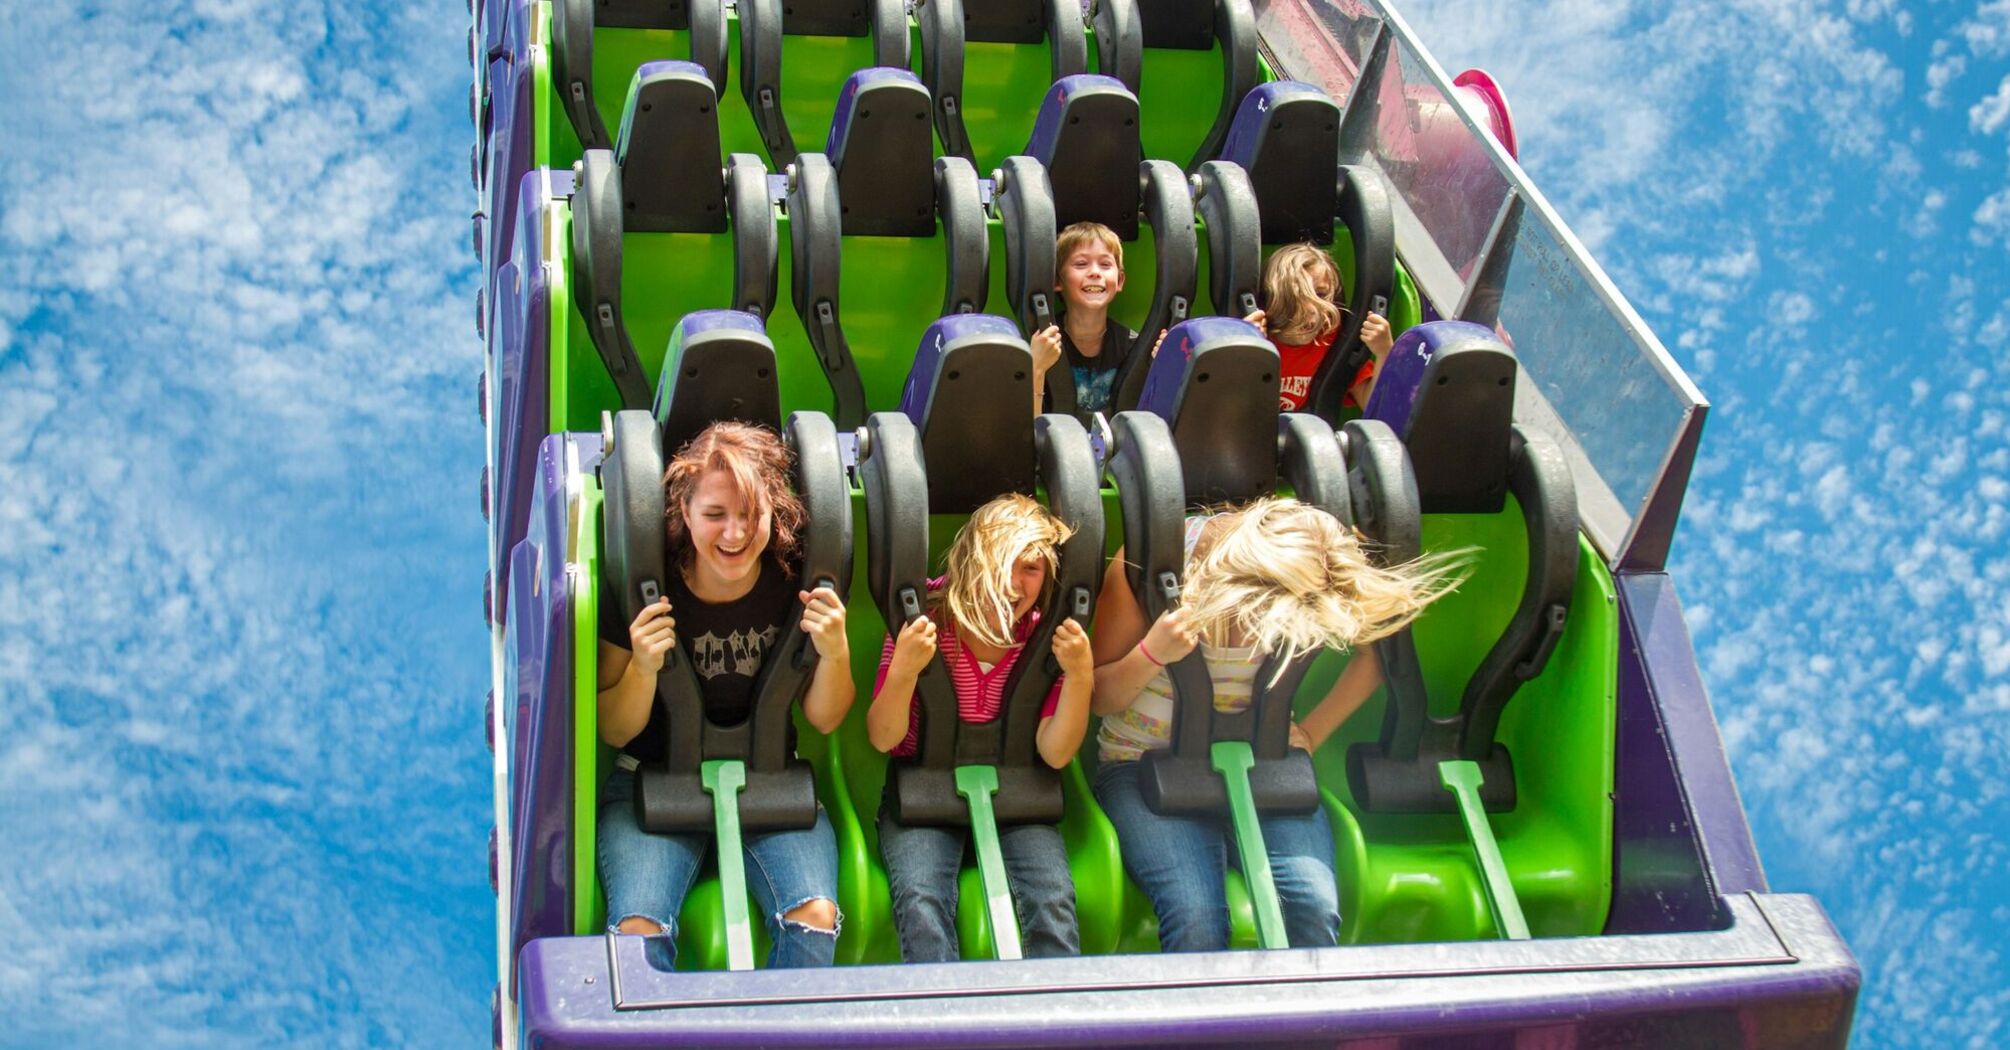 People on a roller coaster ride, expressing excitement and joy against a clear blue sky